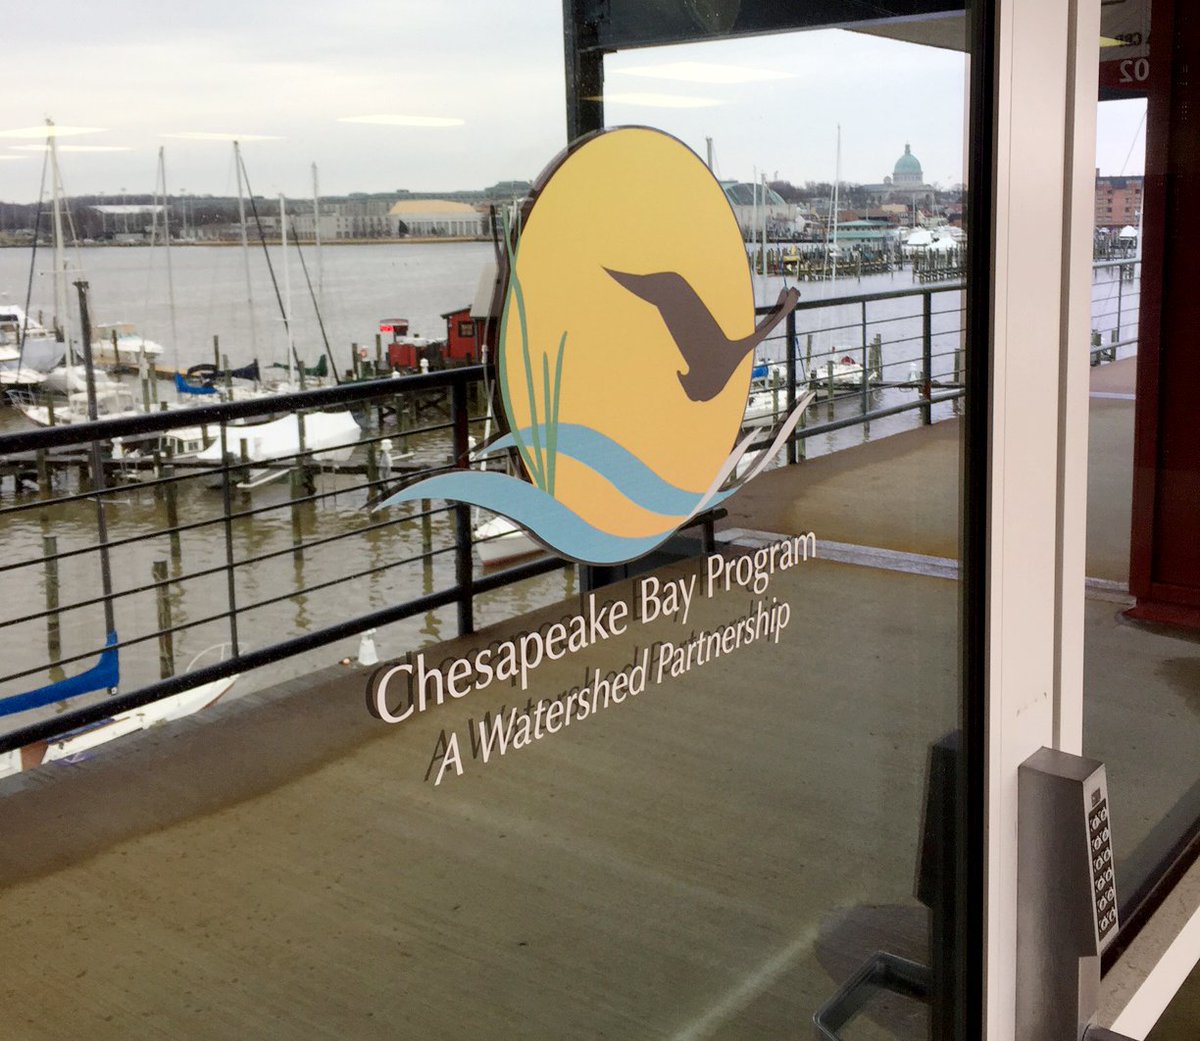 LimnoTech’s @jfbmich is meeting with folks at EPA's @chesbayprogram and other organizations in Annapolis, MD today to gather #NutrientReduction lessons to bring back to the #GreatLakes.